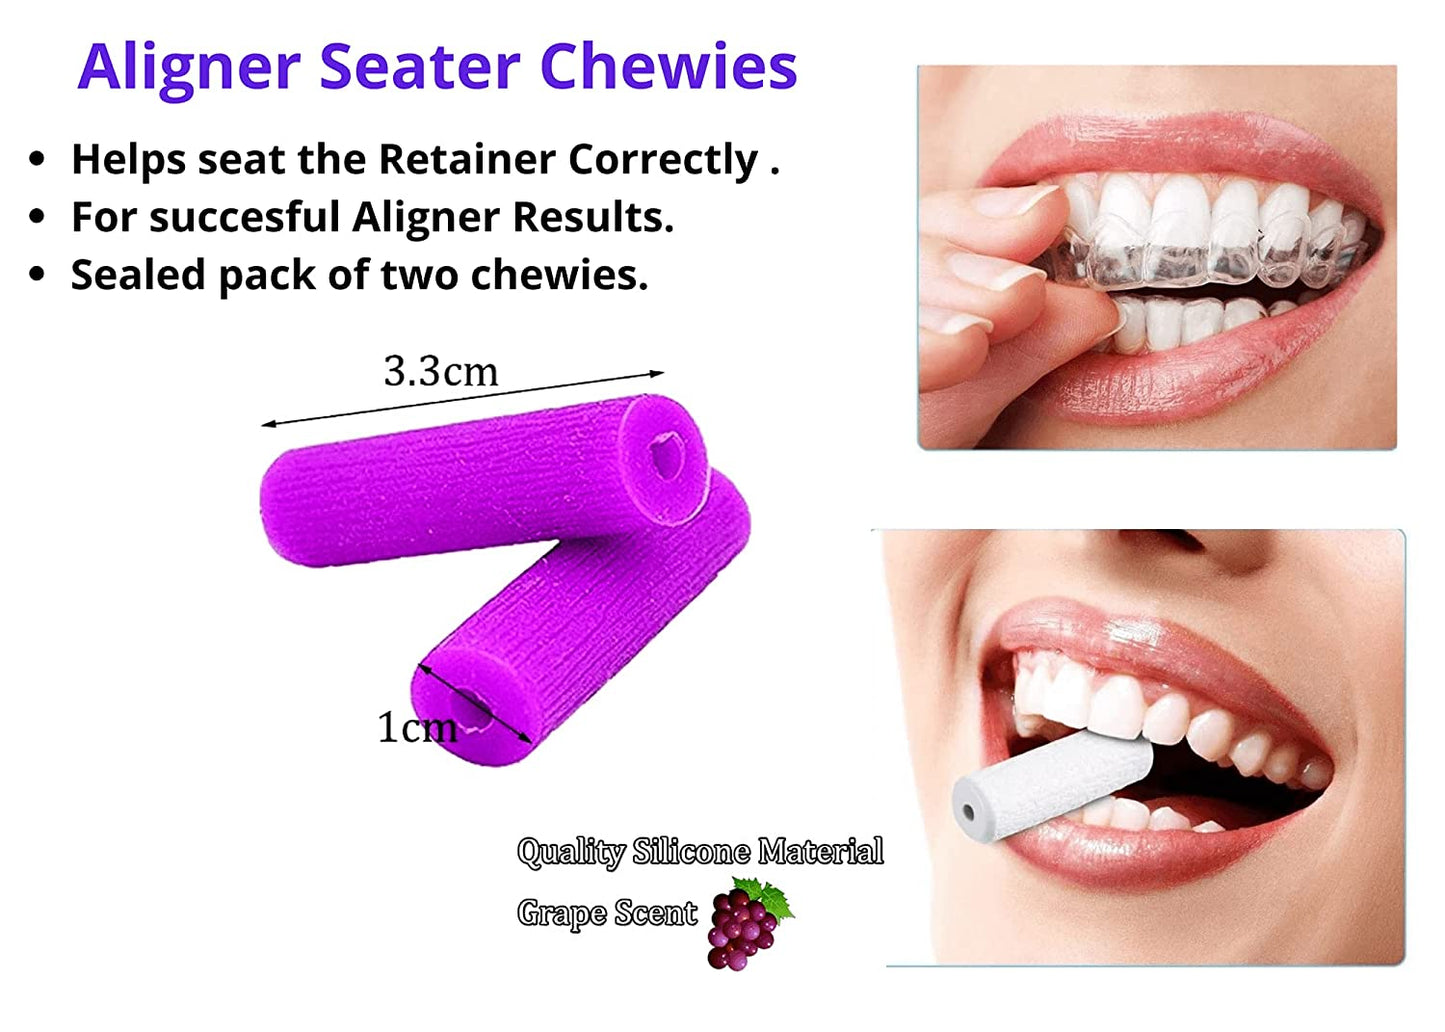 Clear Aligner Set, Retainer case, Aligner Removal tool, Aligner Chewies, and Denture Cleaner Brush, Bundle Set 5 Pcs, Dentures, Mouth Guard, With Deluxe EasyCarry Bag.